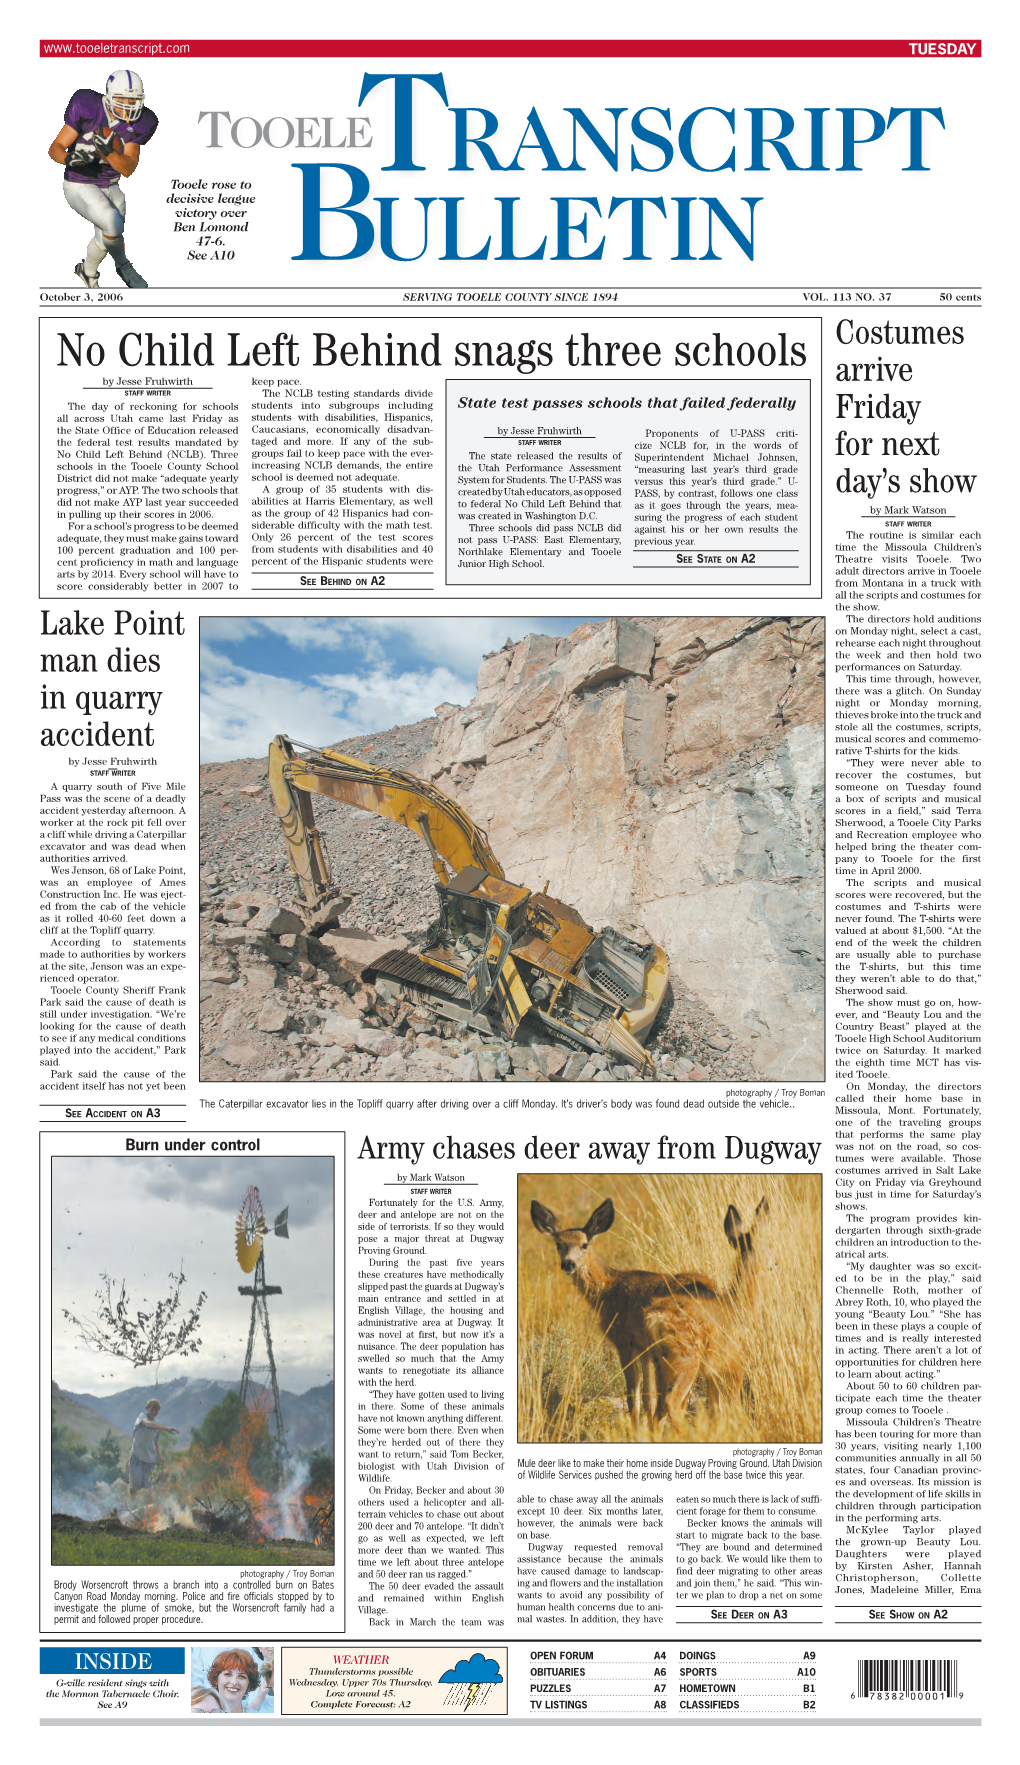 A1,2,3 10-3-06 Front Page